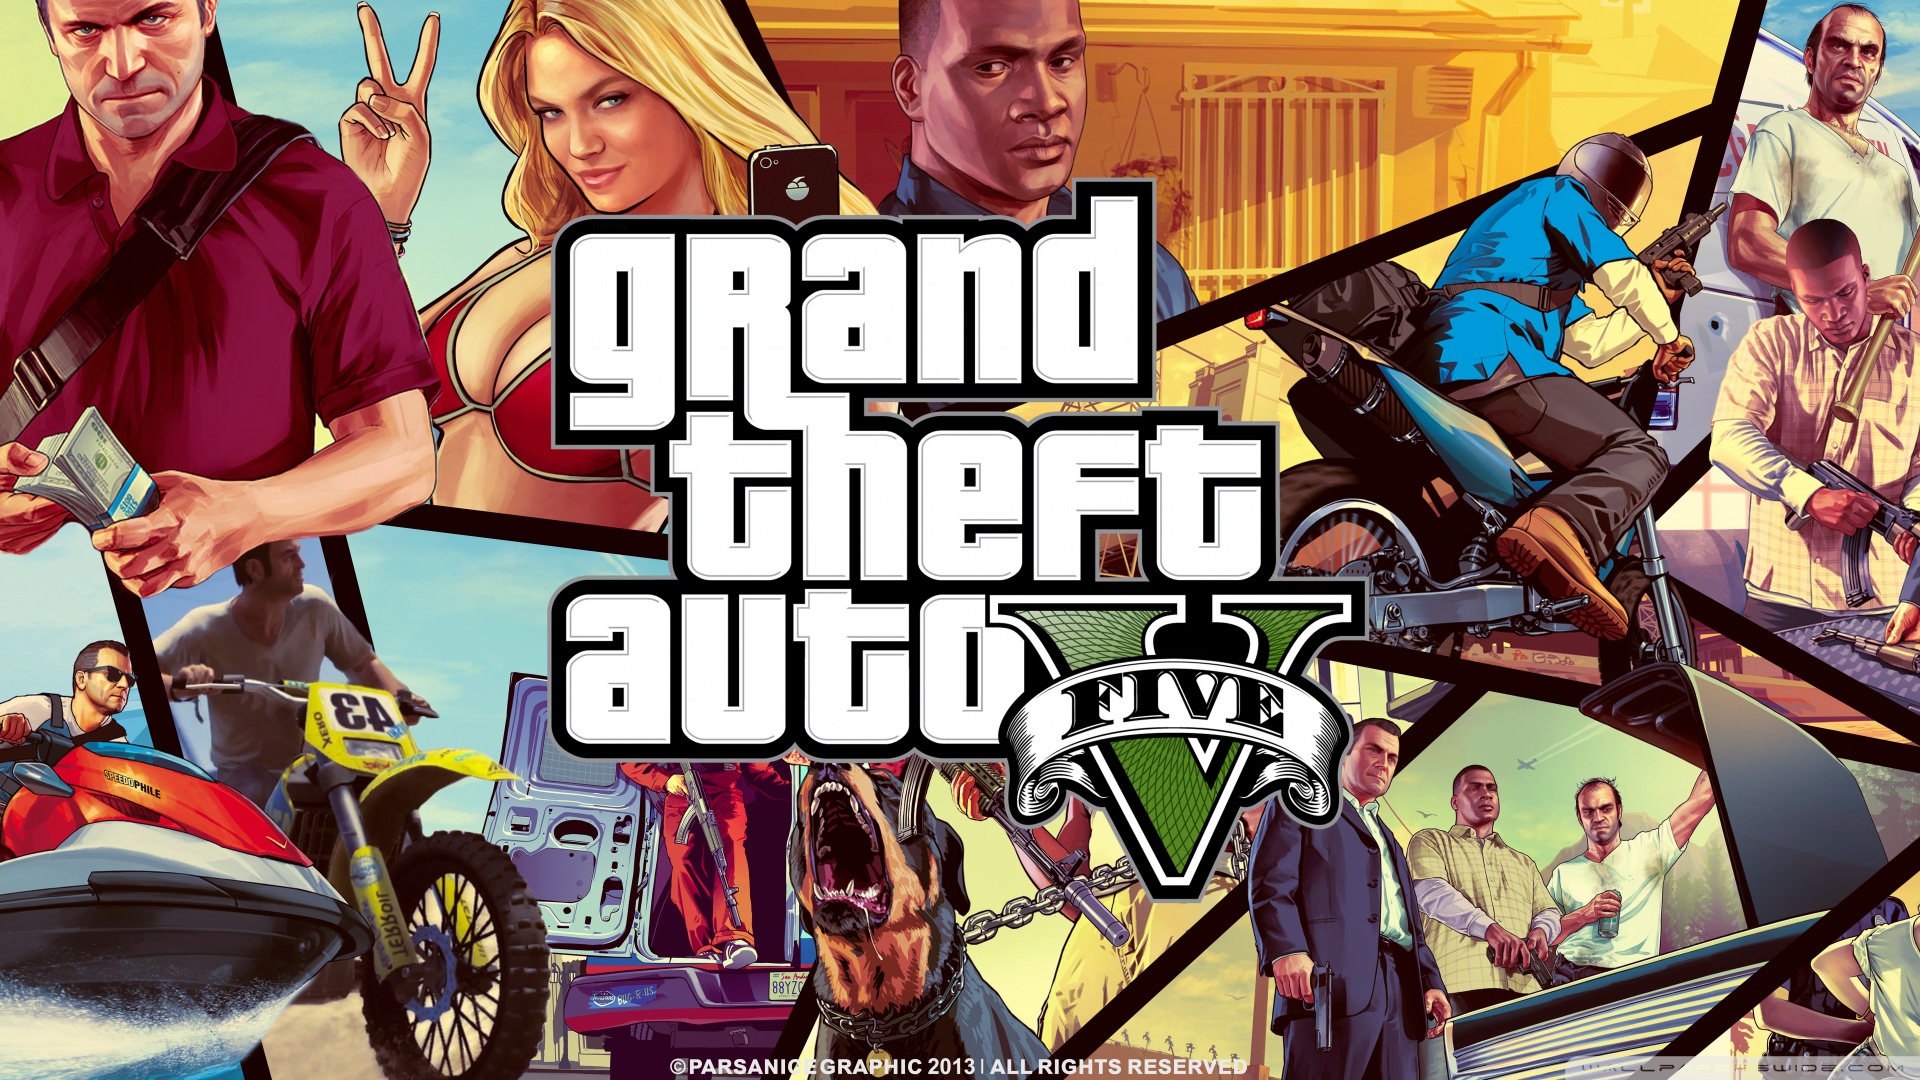 Grand Theft Auto Series – All GTA Games in Order